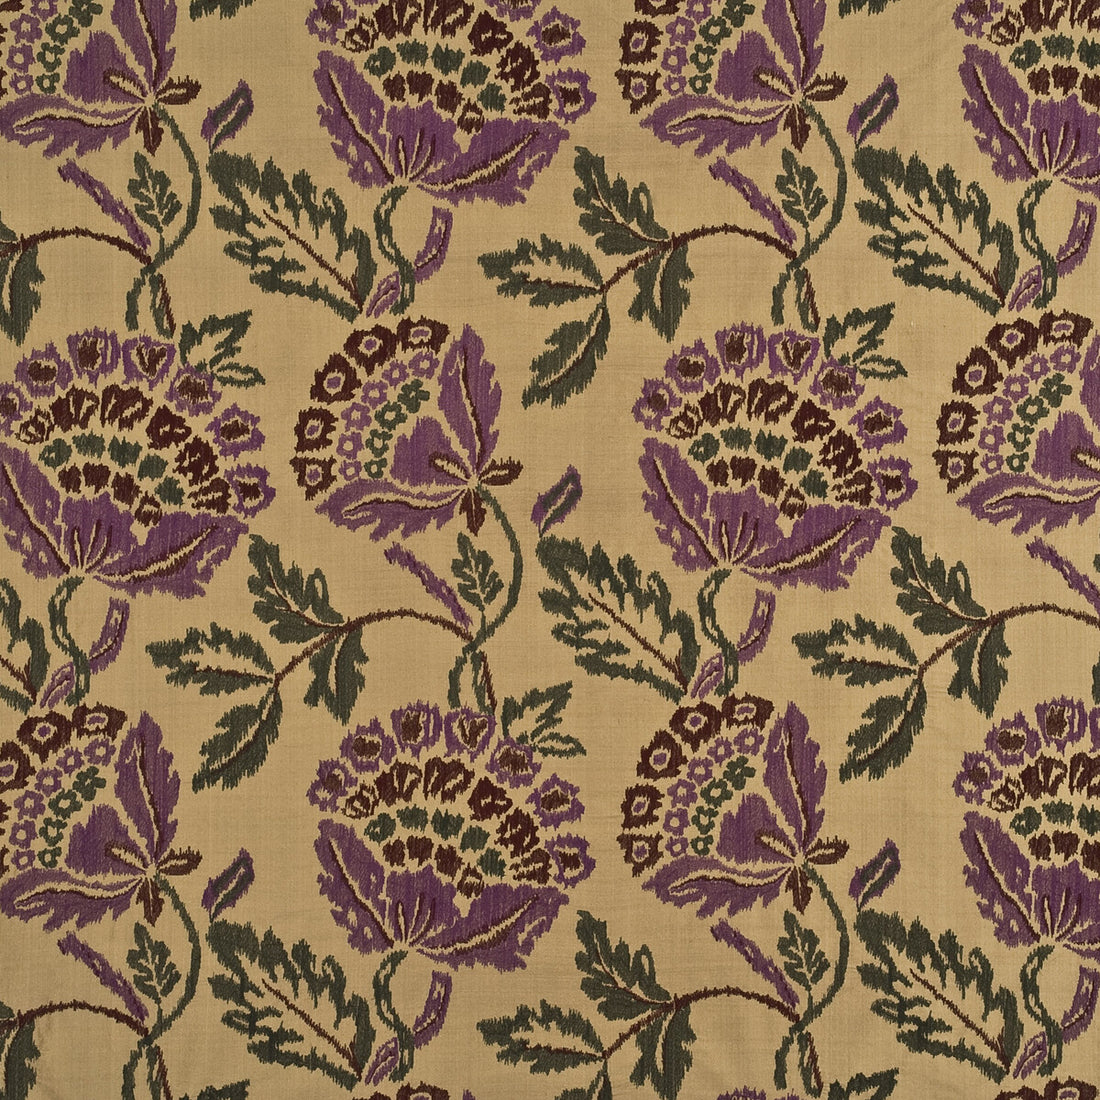 Oriana Silk fabric in damson/red color - pattern FD670.V91.0 - by Mulberry in the Heirloom collection